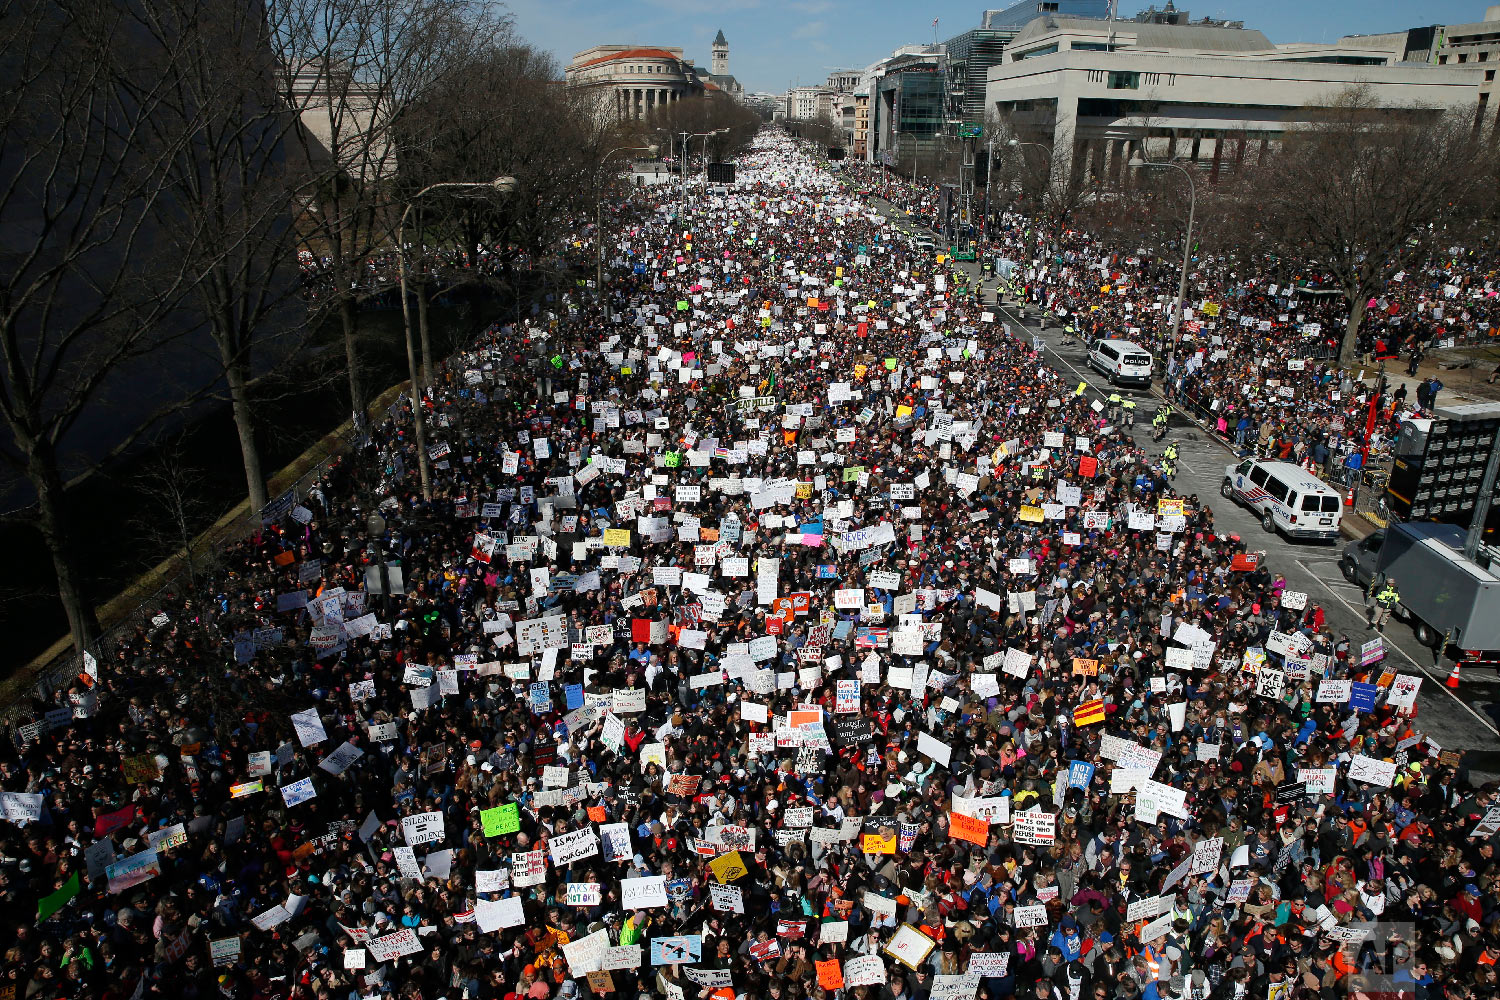  Looking west toward the White House, people fill Pennsylvania Avenue in Washington during the "March for Our Lives" rally in support of gun control on March 24, 2018. The rally was organized following the mass shooting that killed 17 people at Marjo